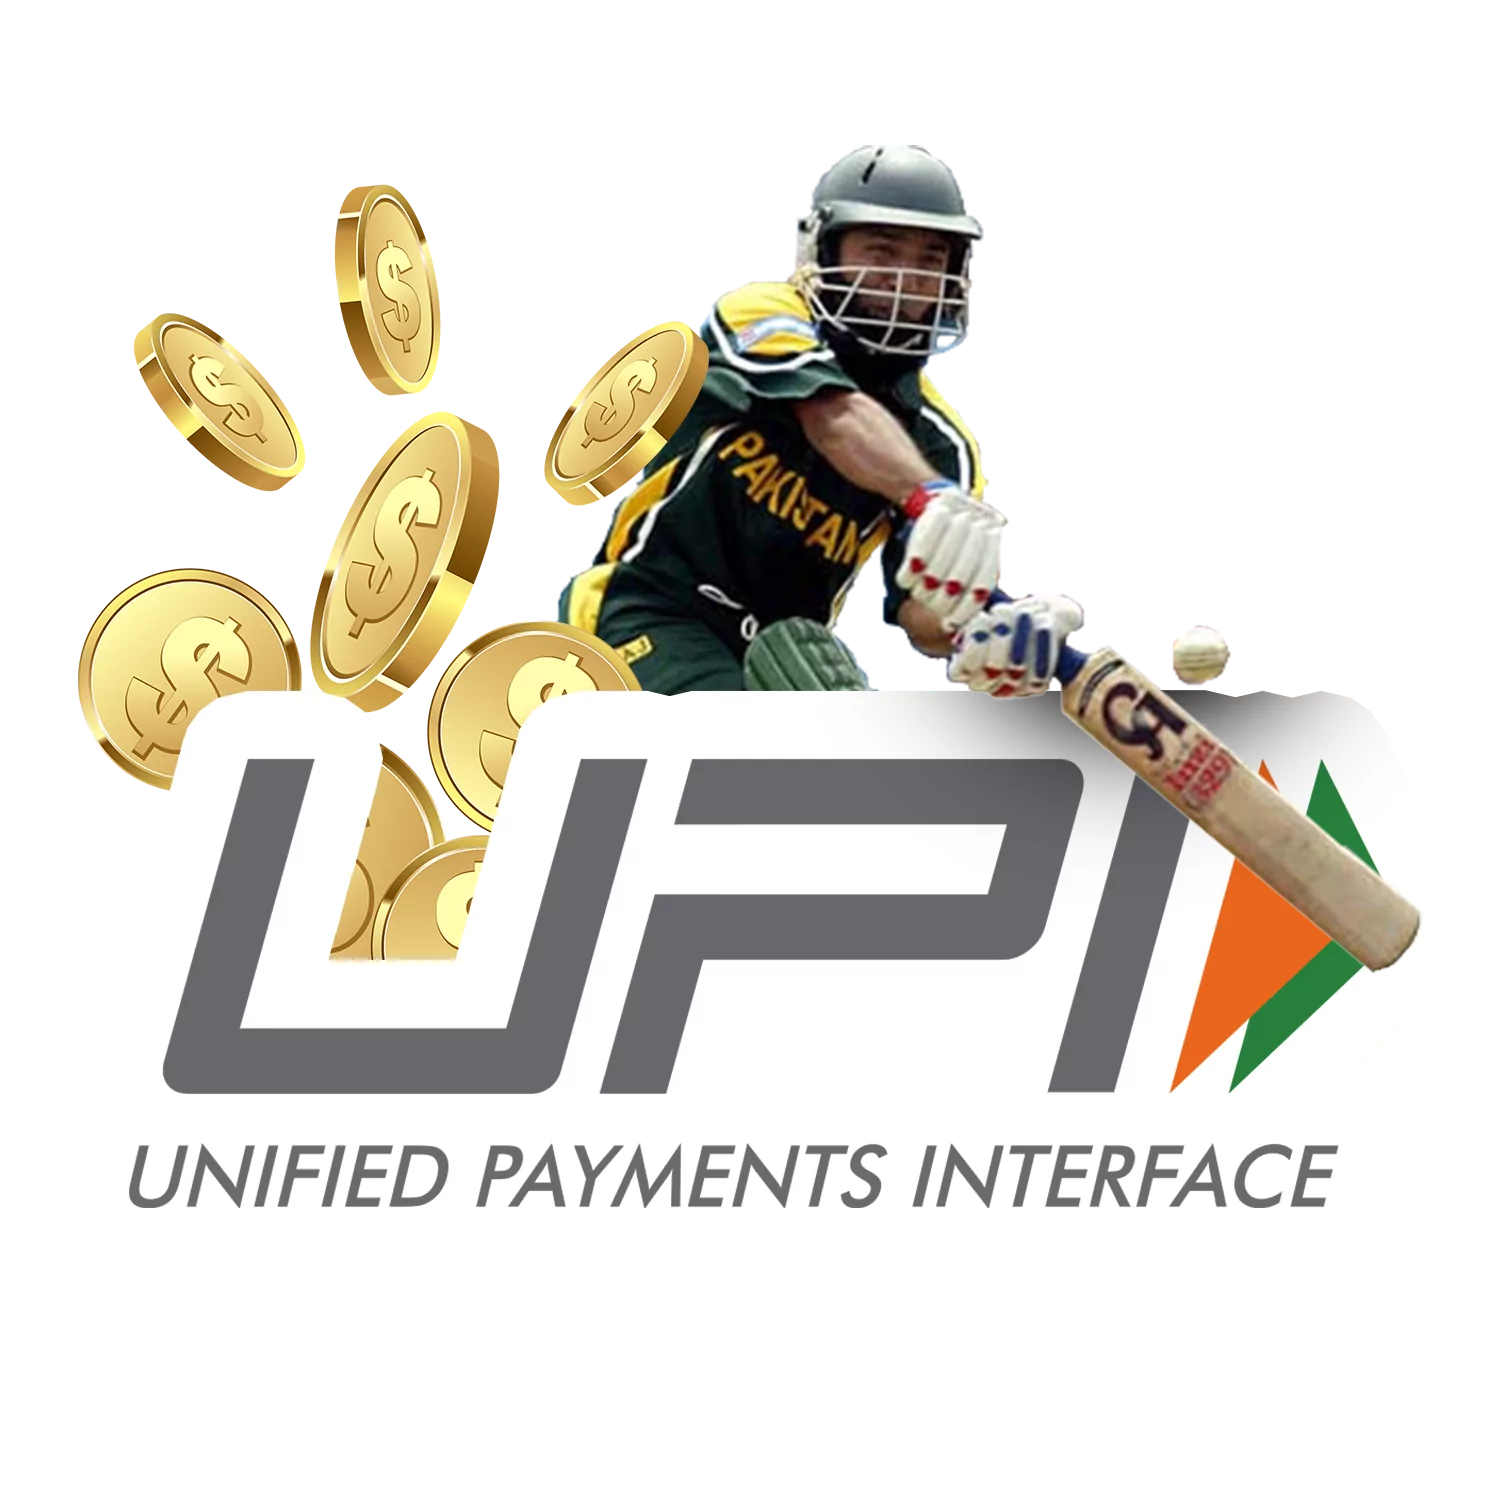 This system combines different payment mrthods and makes cricket betting depositing even easier.